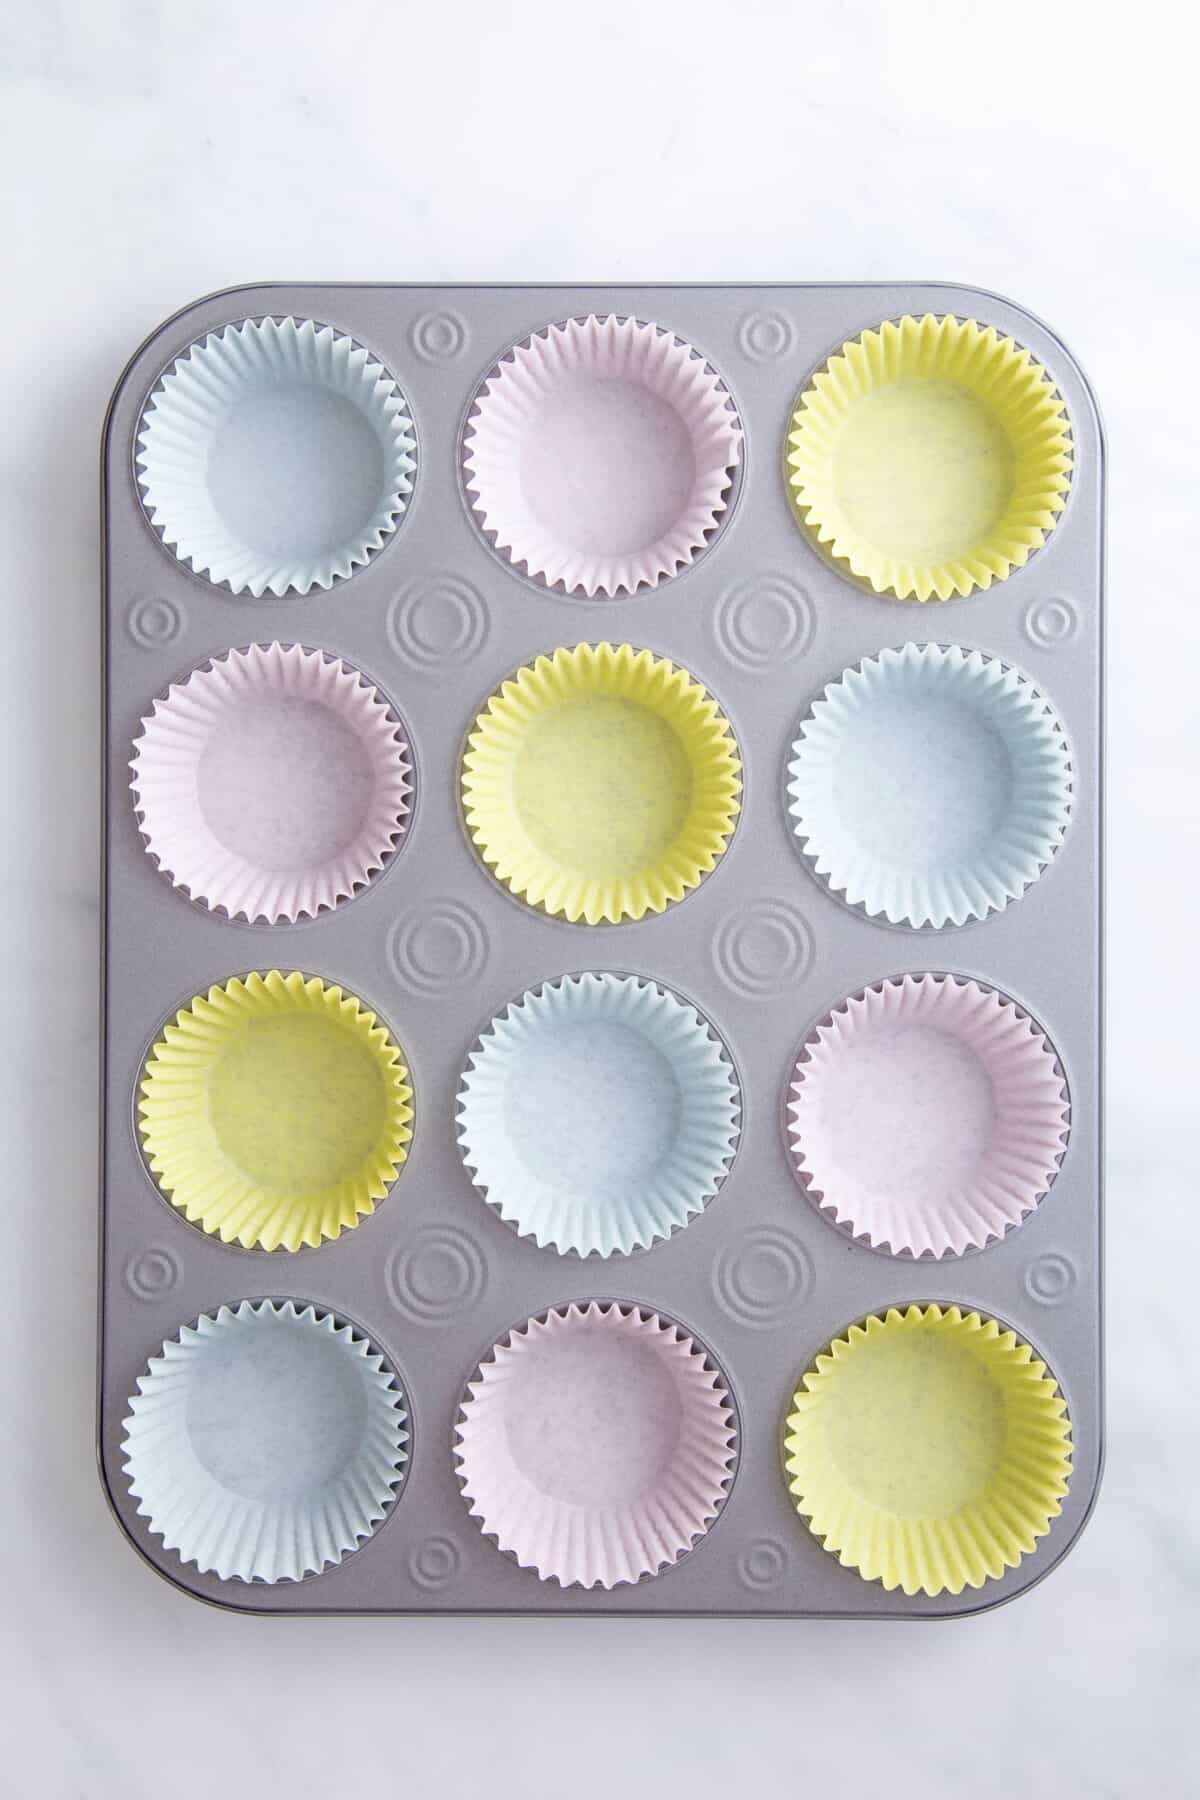 cupcake tin lined with 12 pastel colored cupcake liners. 